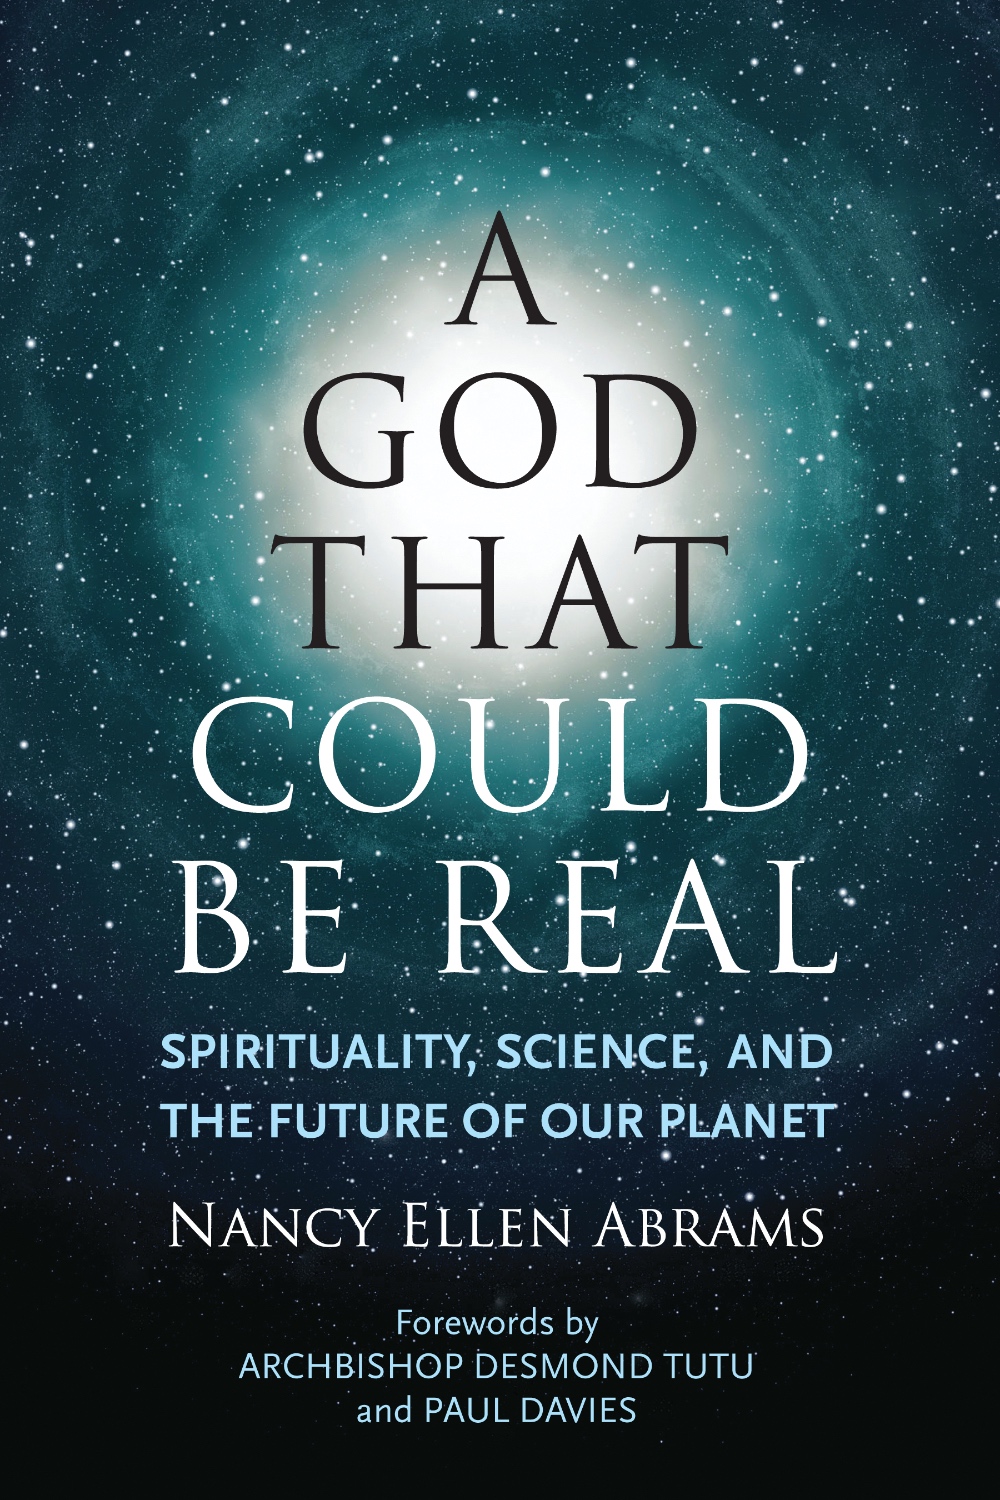 A God That Could Be Real: Science, Spirituality and the Future of Our Planet